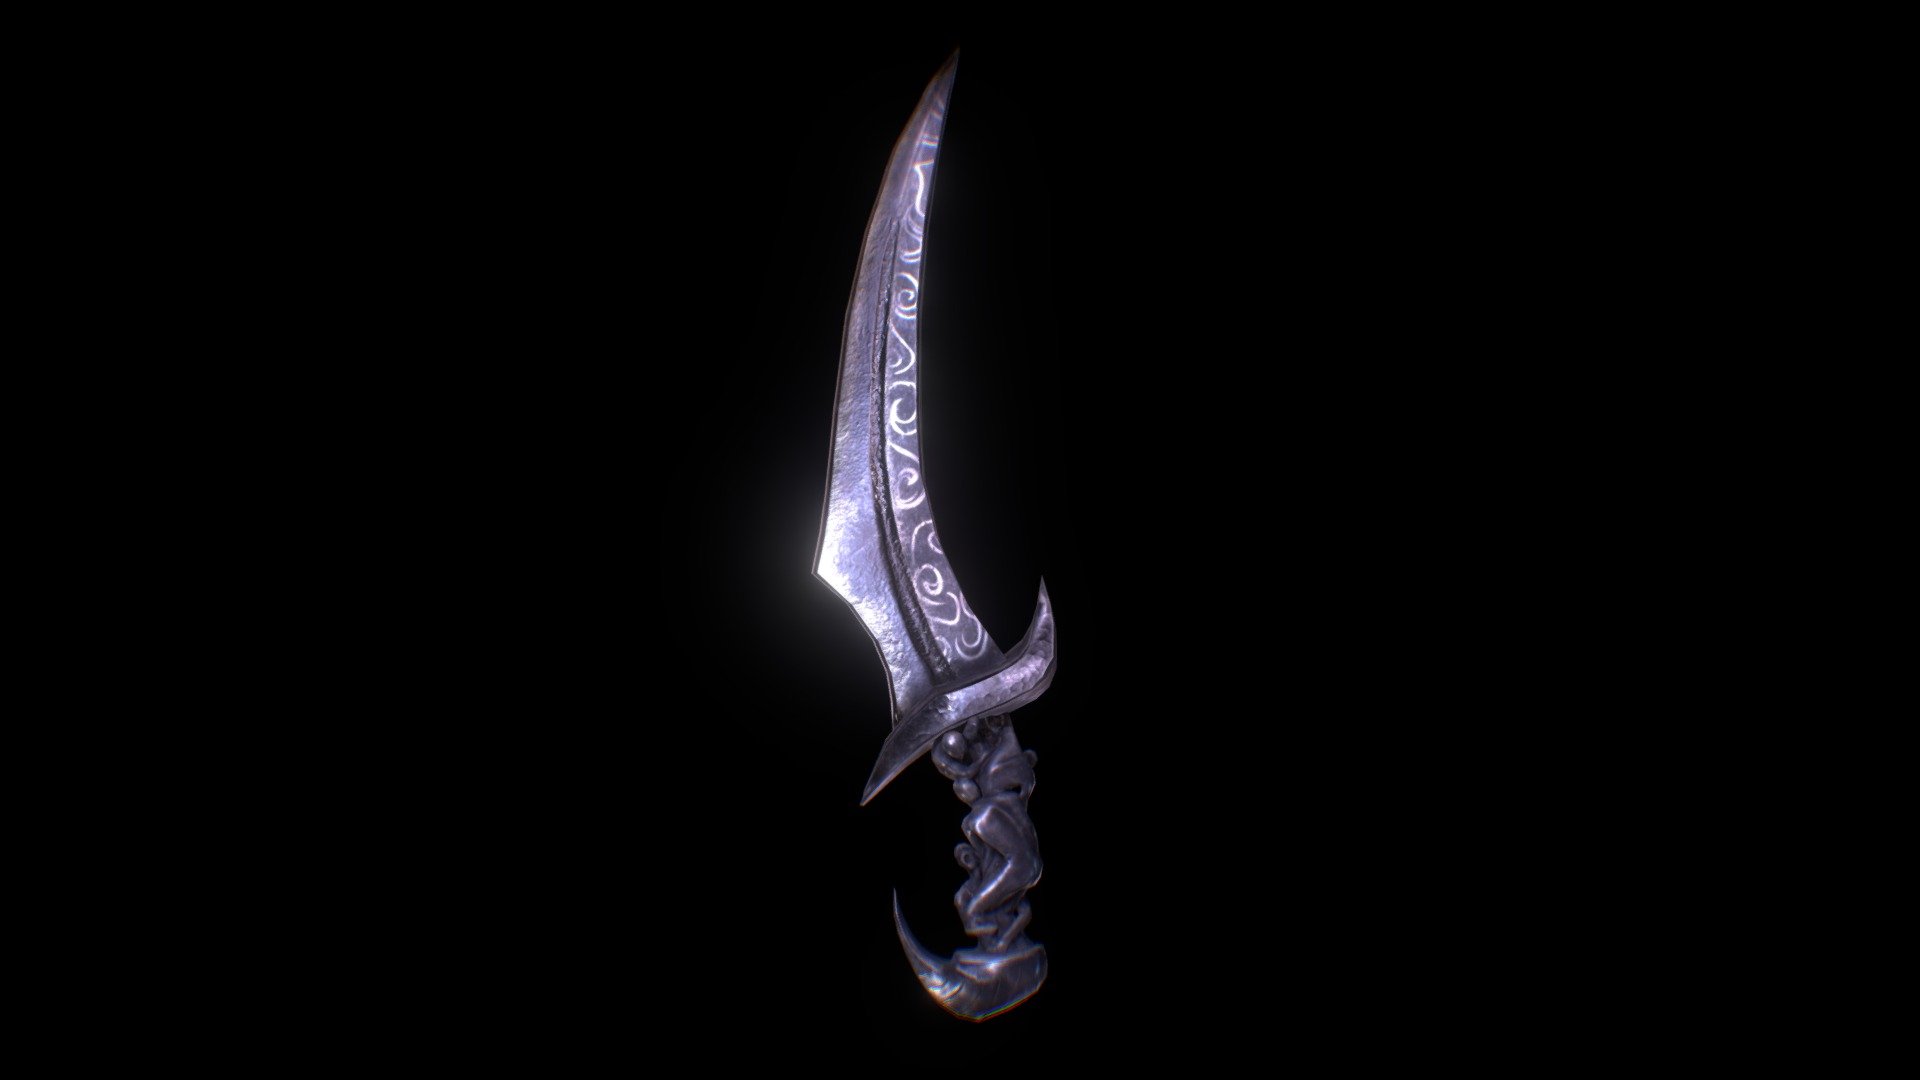 The Blade of Woe for The Elder Scrolls Renewal: Skyblivion - 3.9k tris. I am often skeptical about spiky fantasy weapon designs, but boy was the talented Roberto Gatto's concept art too sexy to resist. The crawling tormented souls motif represent lives taken by this dreaded dagger 3d model